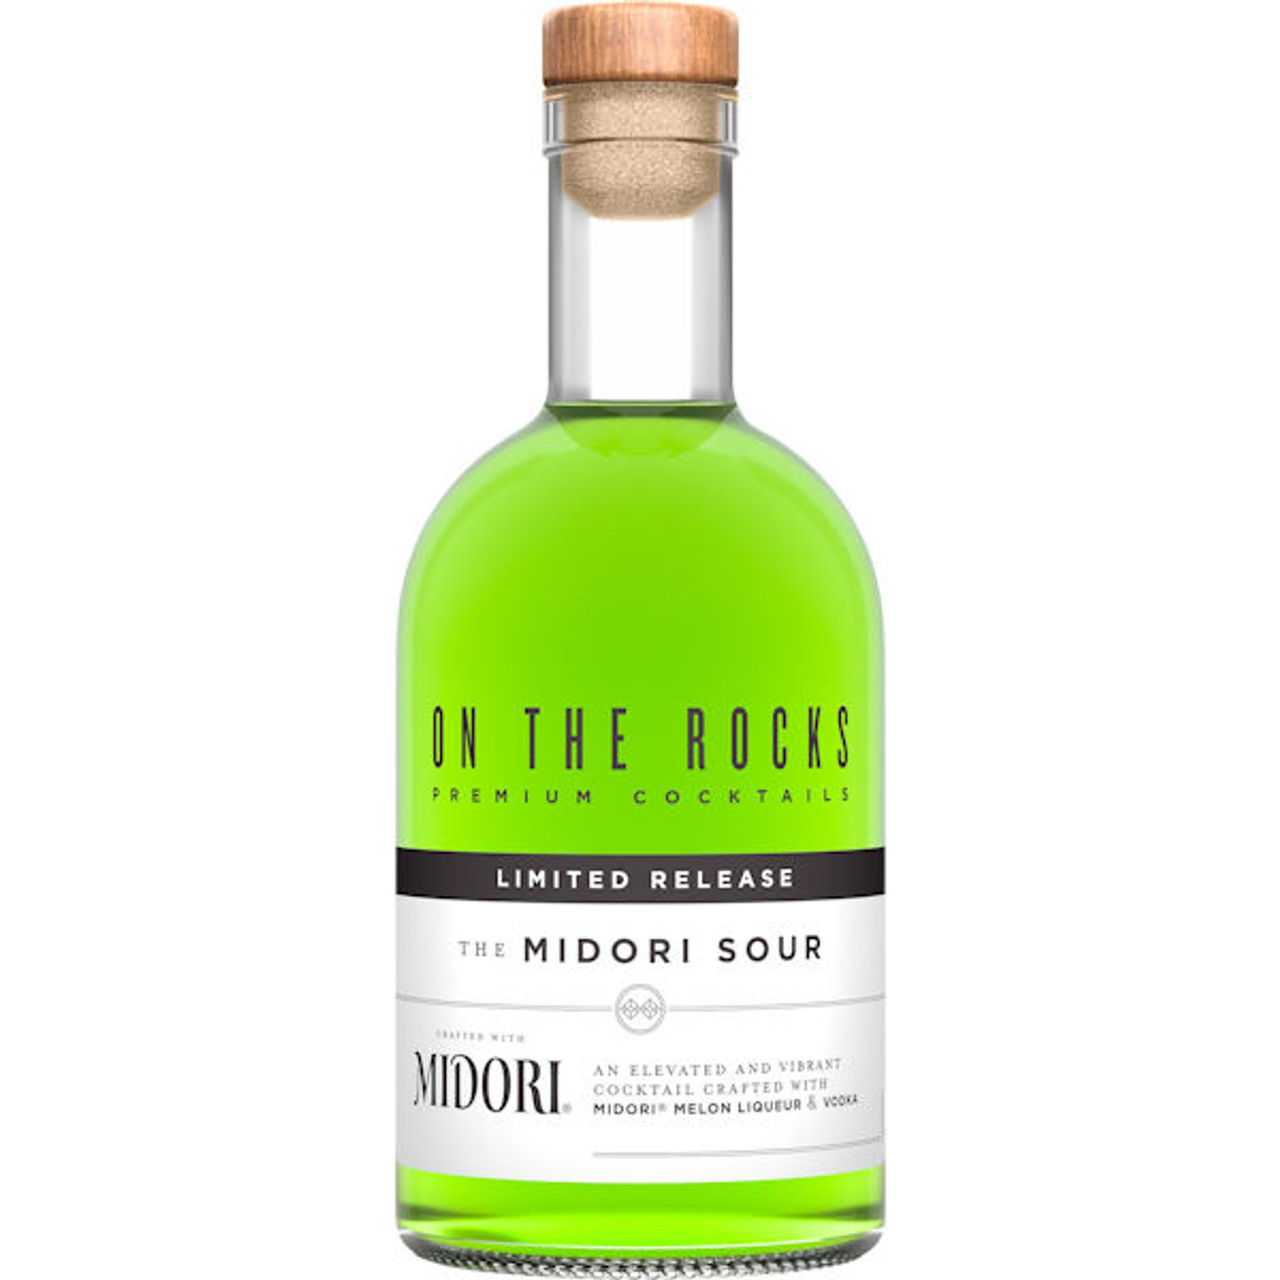 https://cdn11.bigcommerce.com/s-a04d0/images/stencil/1280x1280/products/23143/25038/on-the-rocks-midori-sour-ready-to-drink-cocktail-375ml__08713.1681395926.jpg?c=2